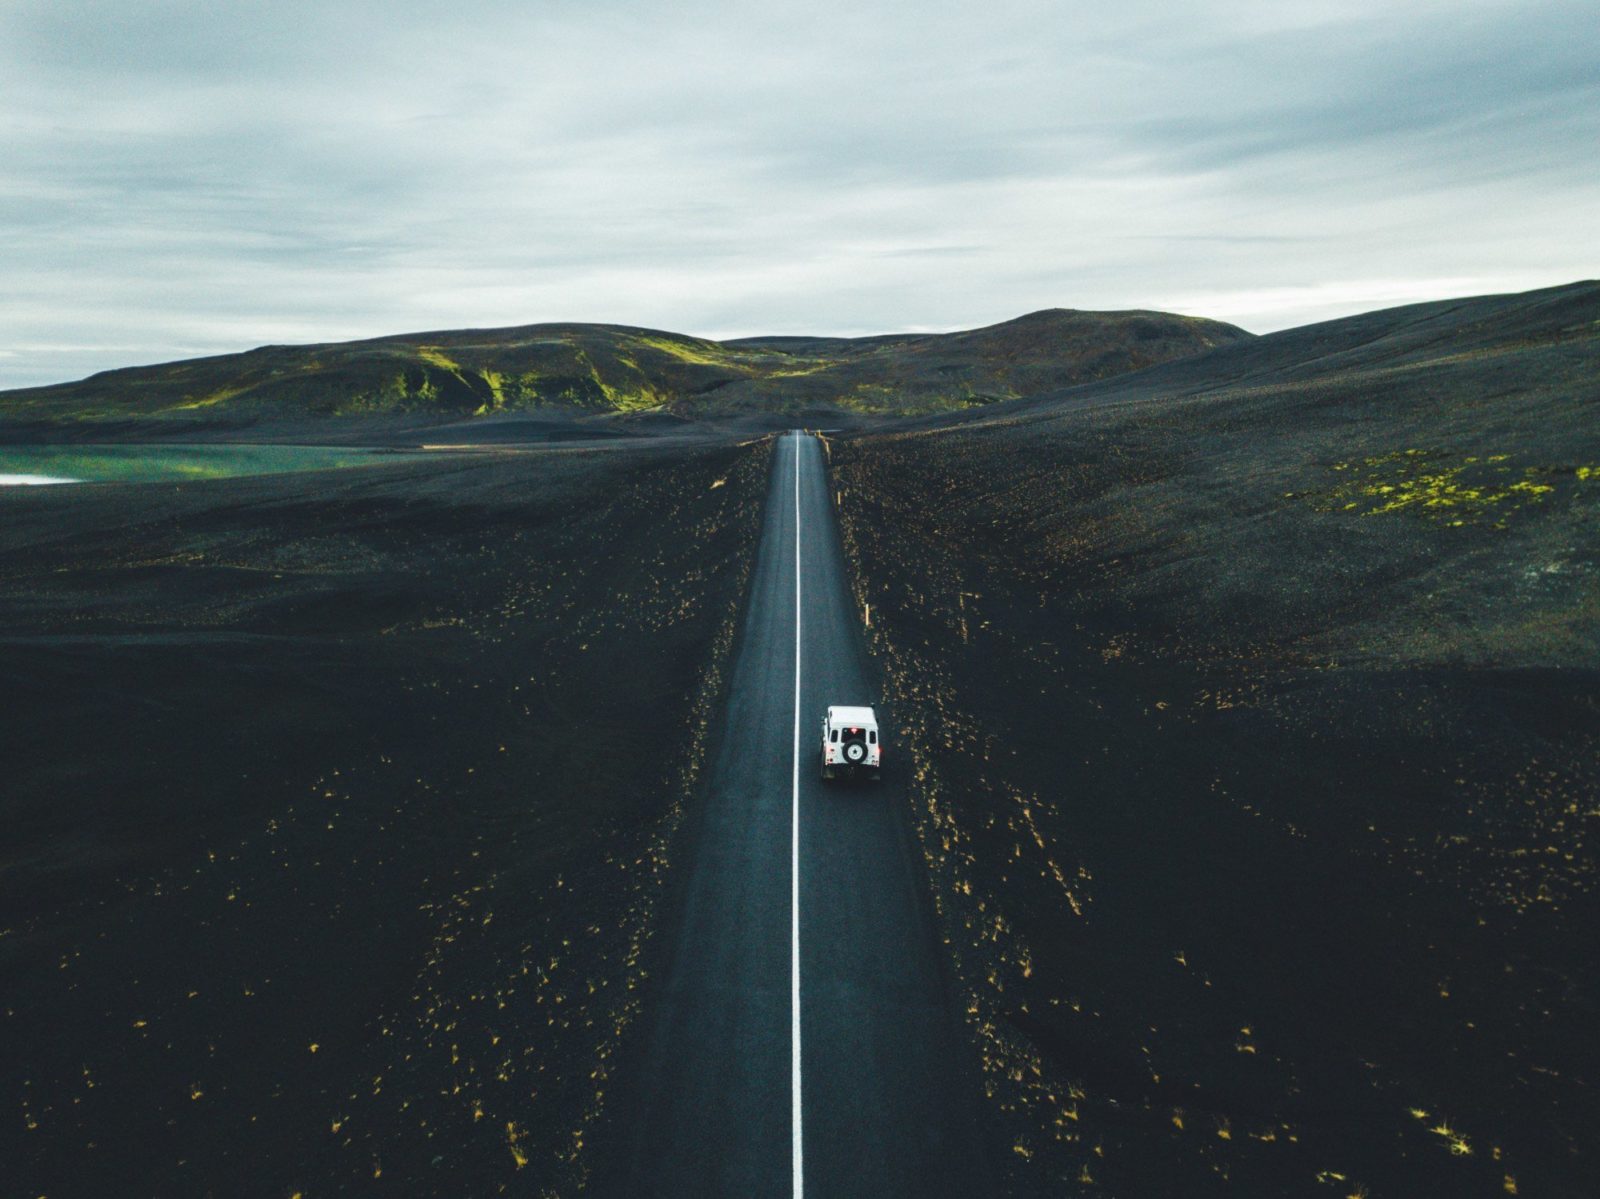 Rent a car in Iceland and go on a road trip.